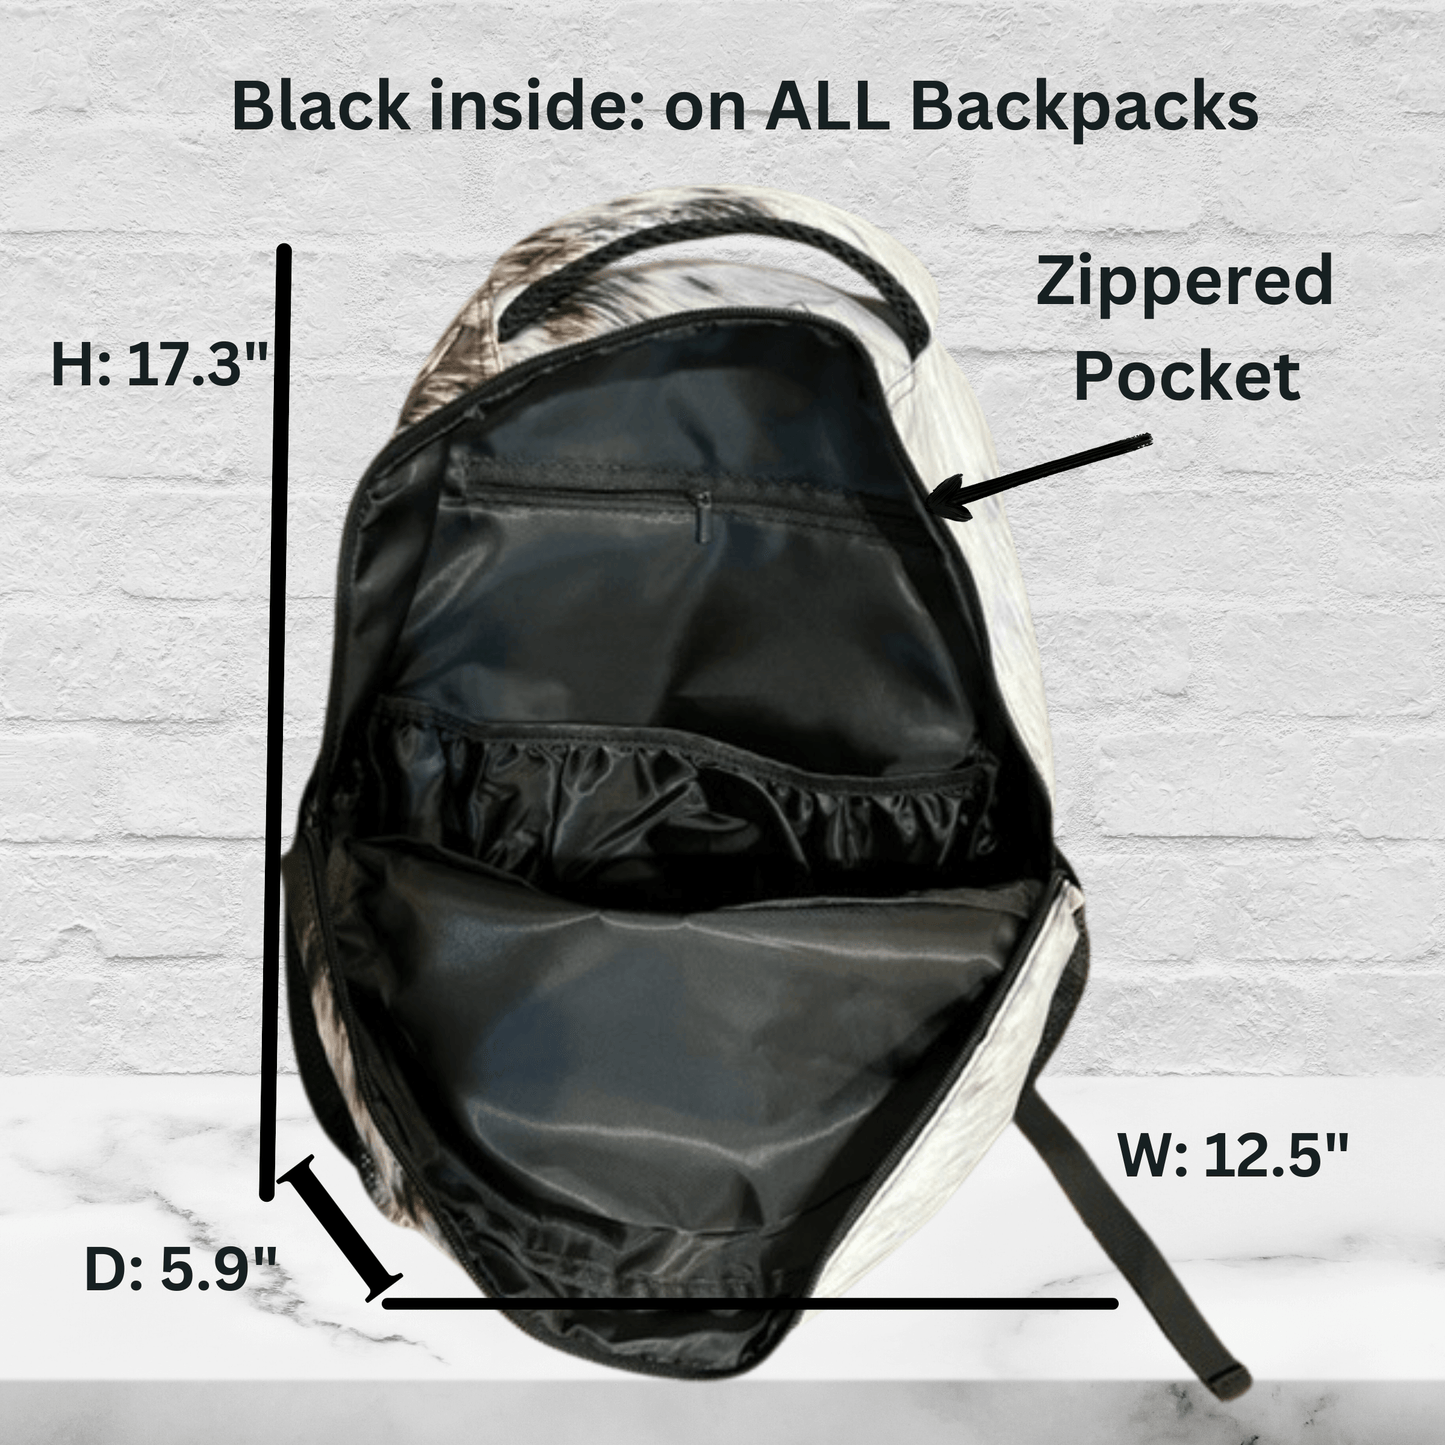 The inside of all our large backpacks is the same black interior.